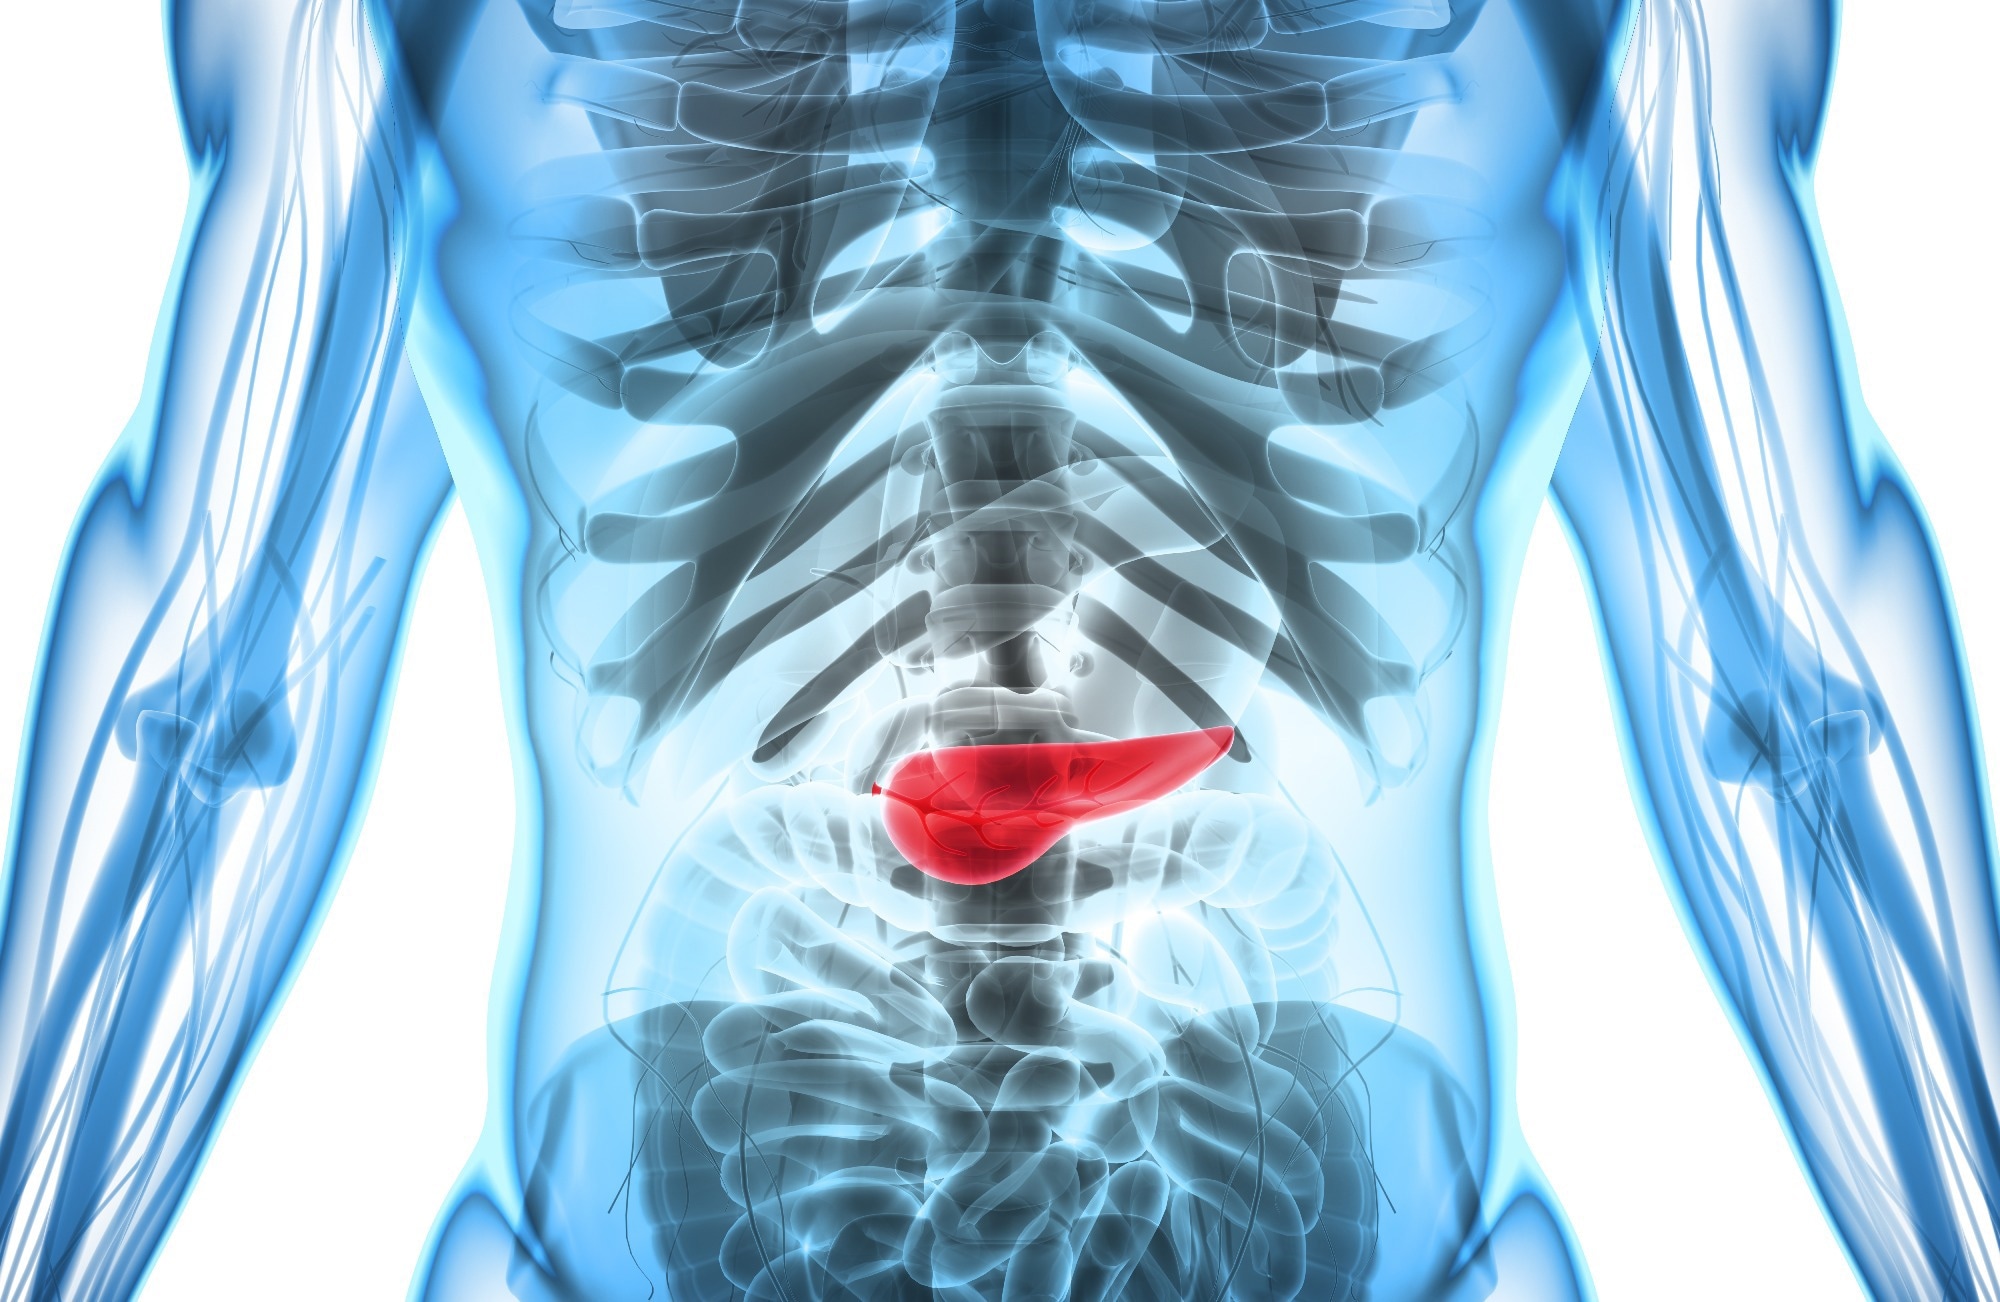 Study: Pancreatic Cancer Cell and Gene Biotherapies: Past, Present, and Future. Image Credit: MDGRPHCS / Shutterstock